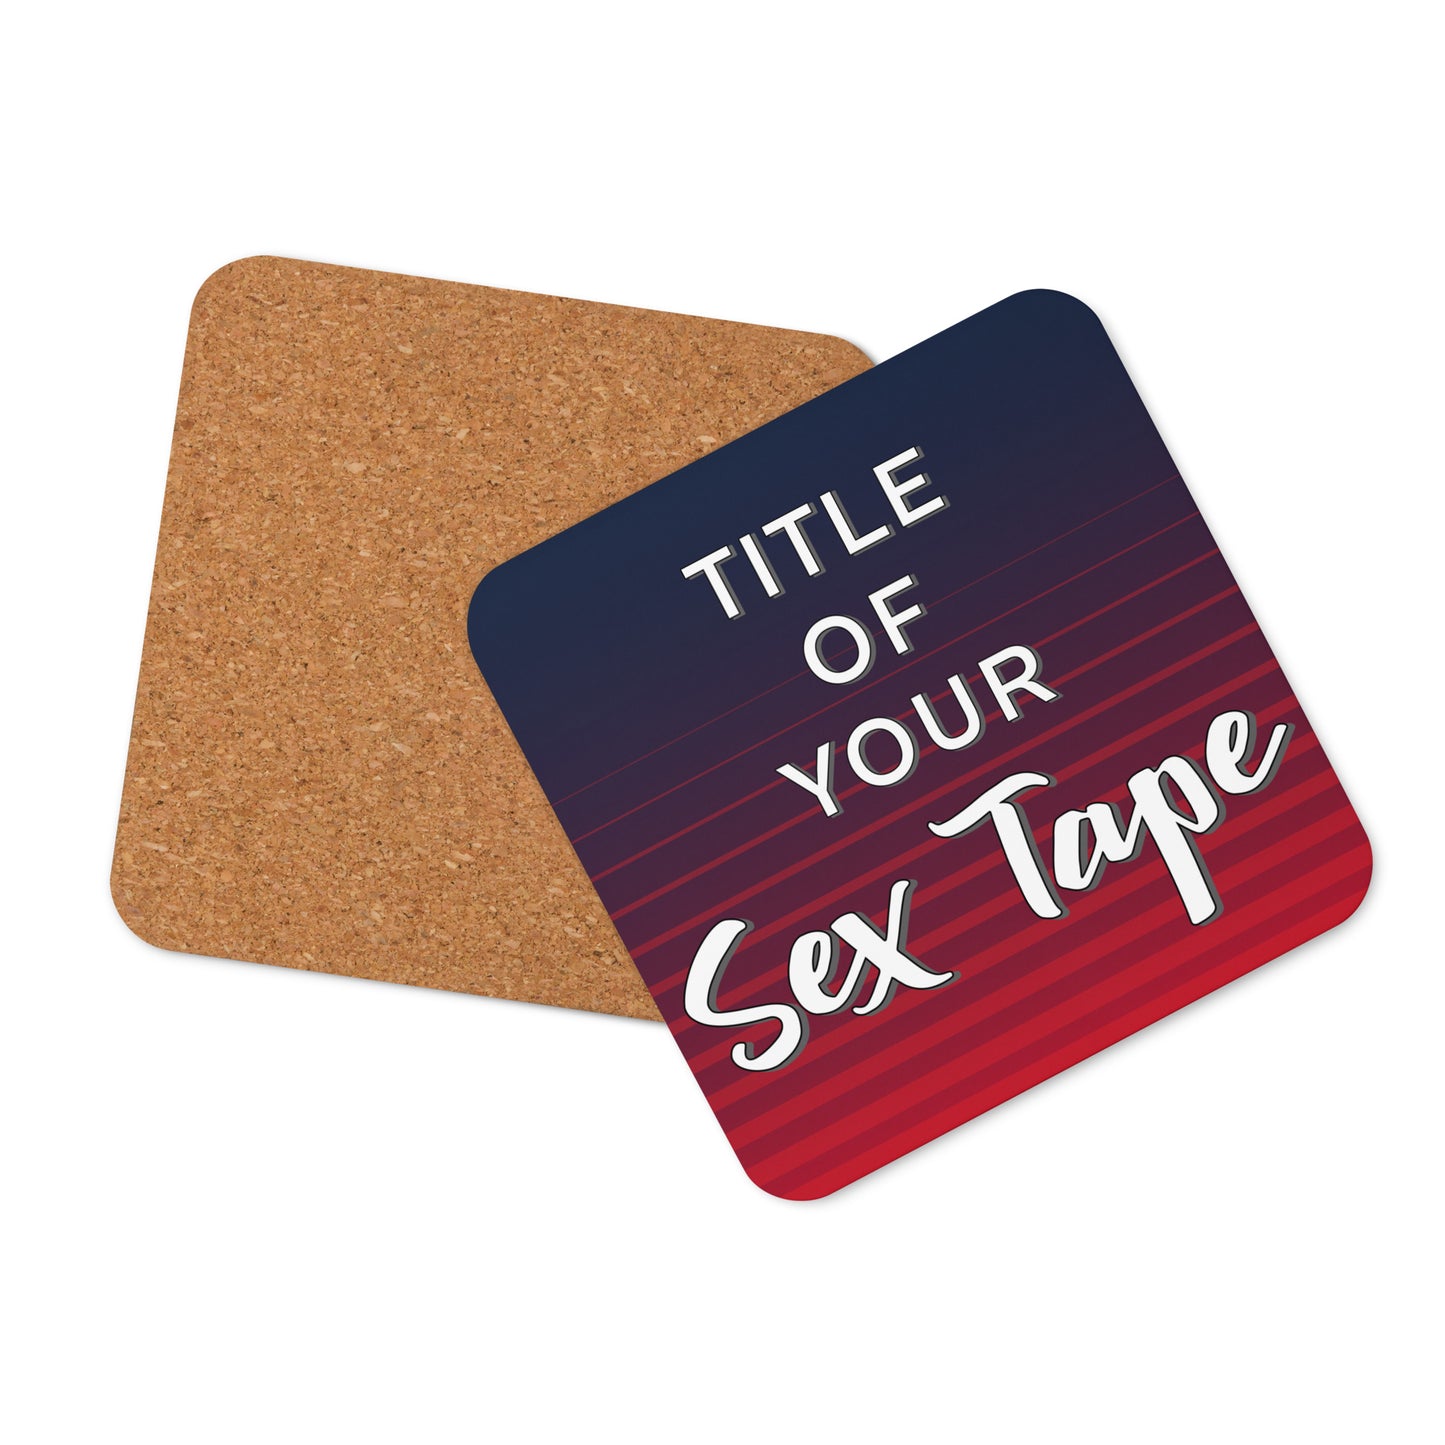 Title of your Sex Tape Cork-back coaster